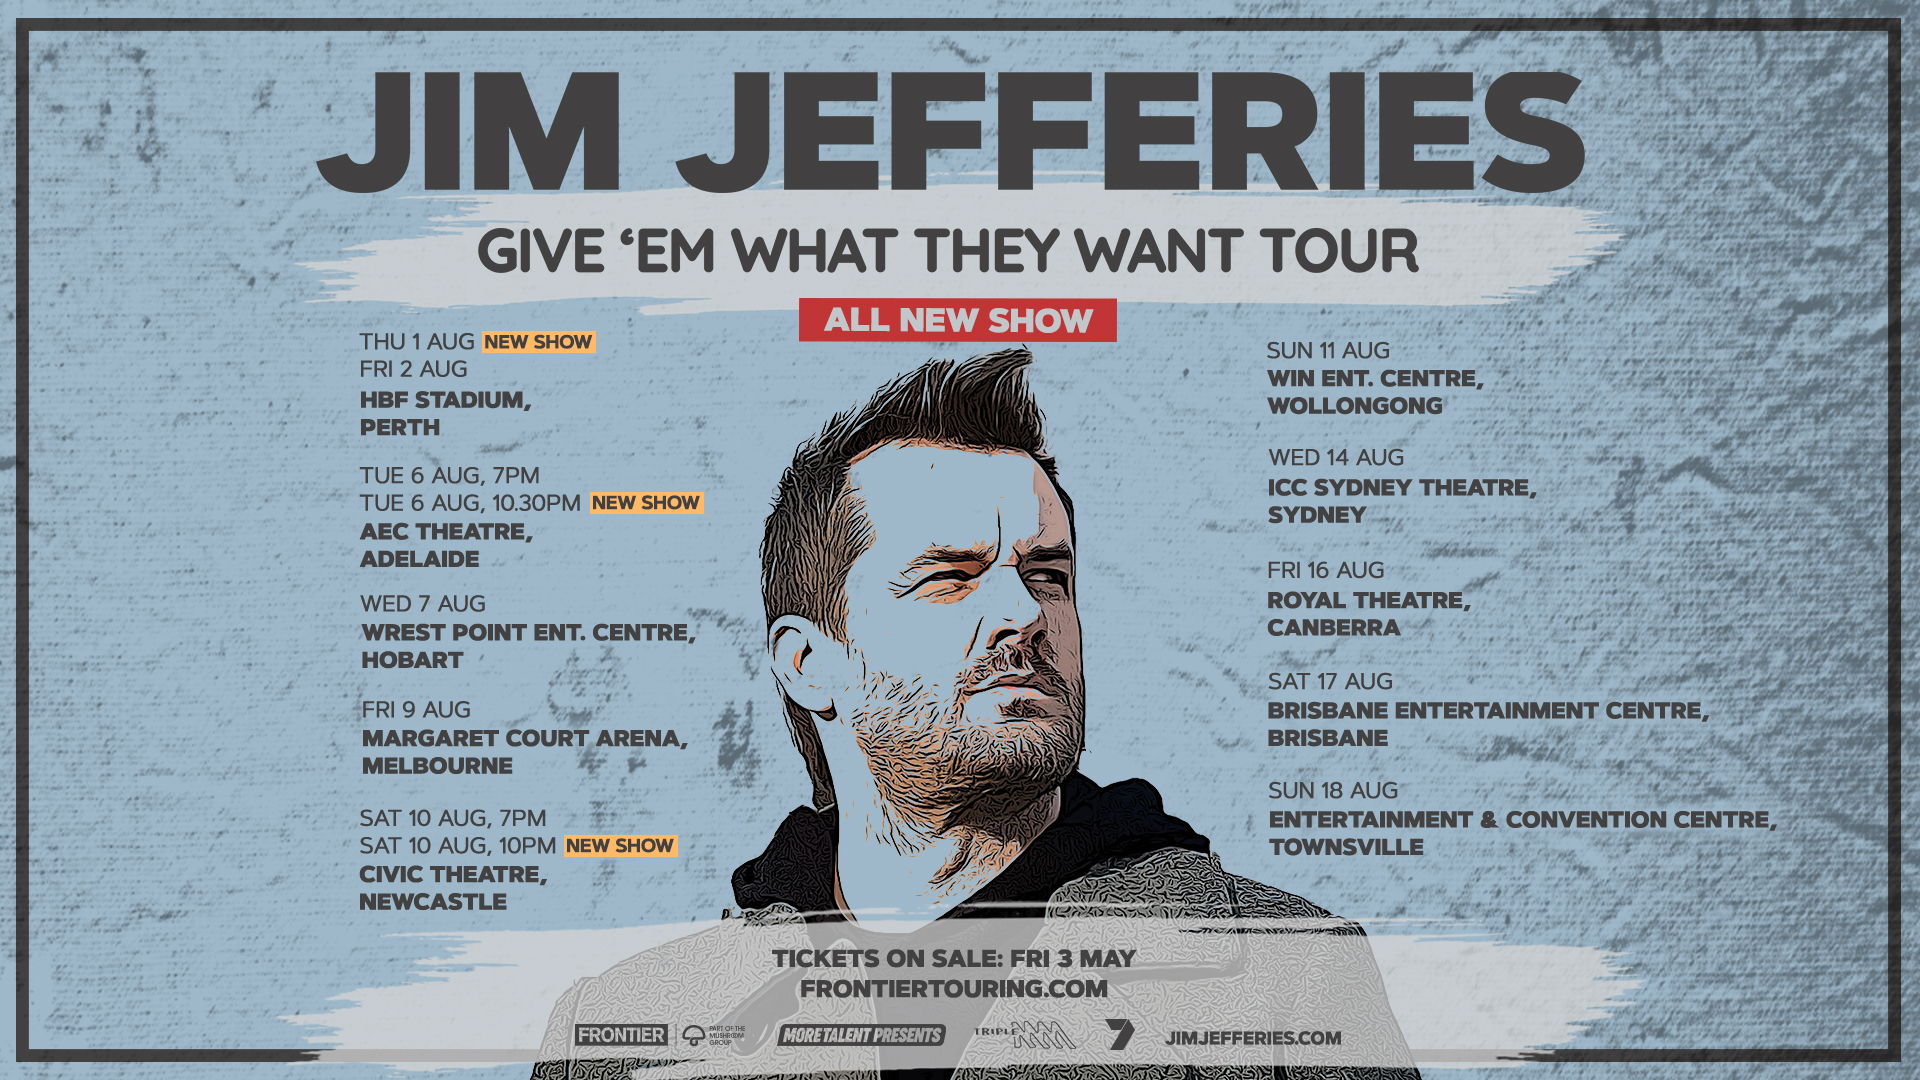 JIM JEFFERIES – 2ND & FINAL PERTH, ADELAIDE & NEWCASTLE SHOWS ADDED TO MEET DEMAND! 